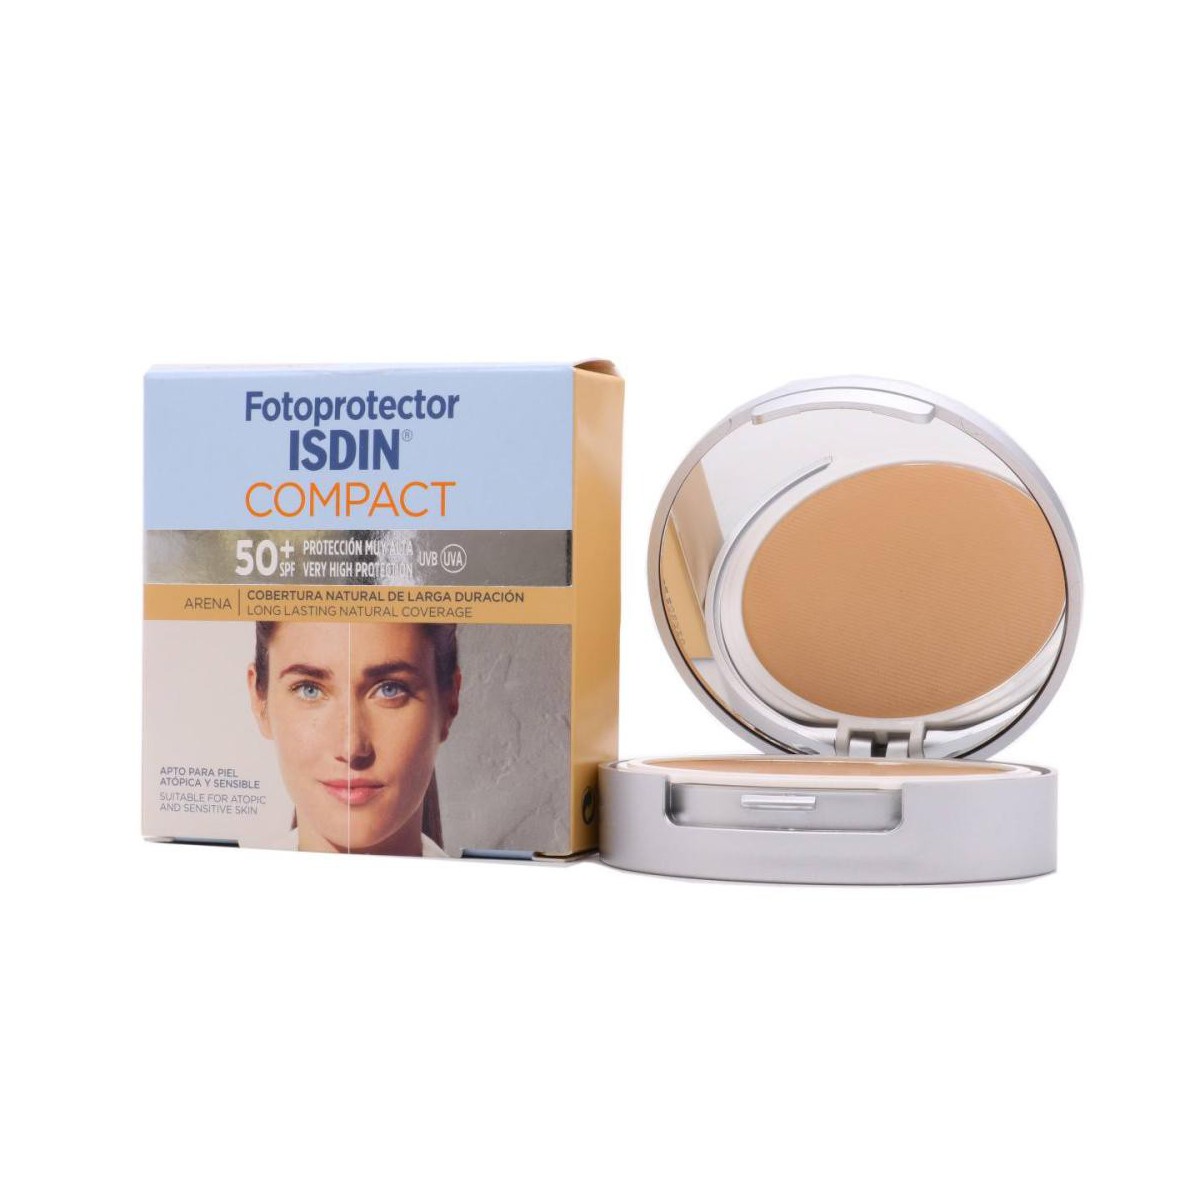 Fotoprotector ISDIN Compact SPF50+ Arena